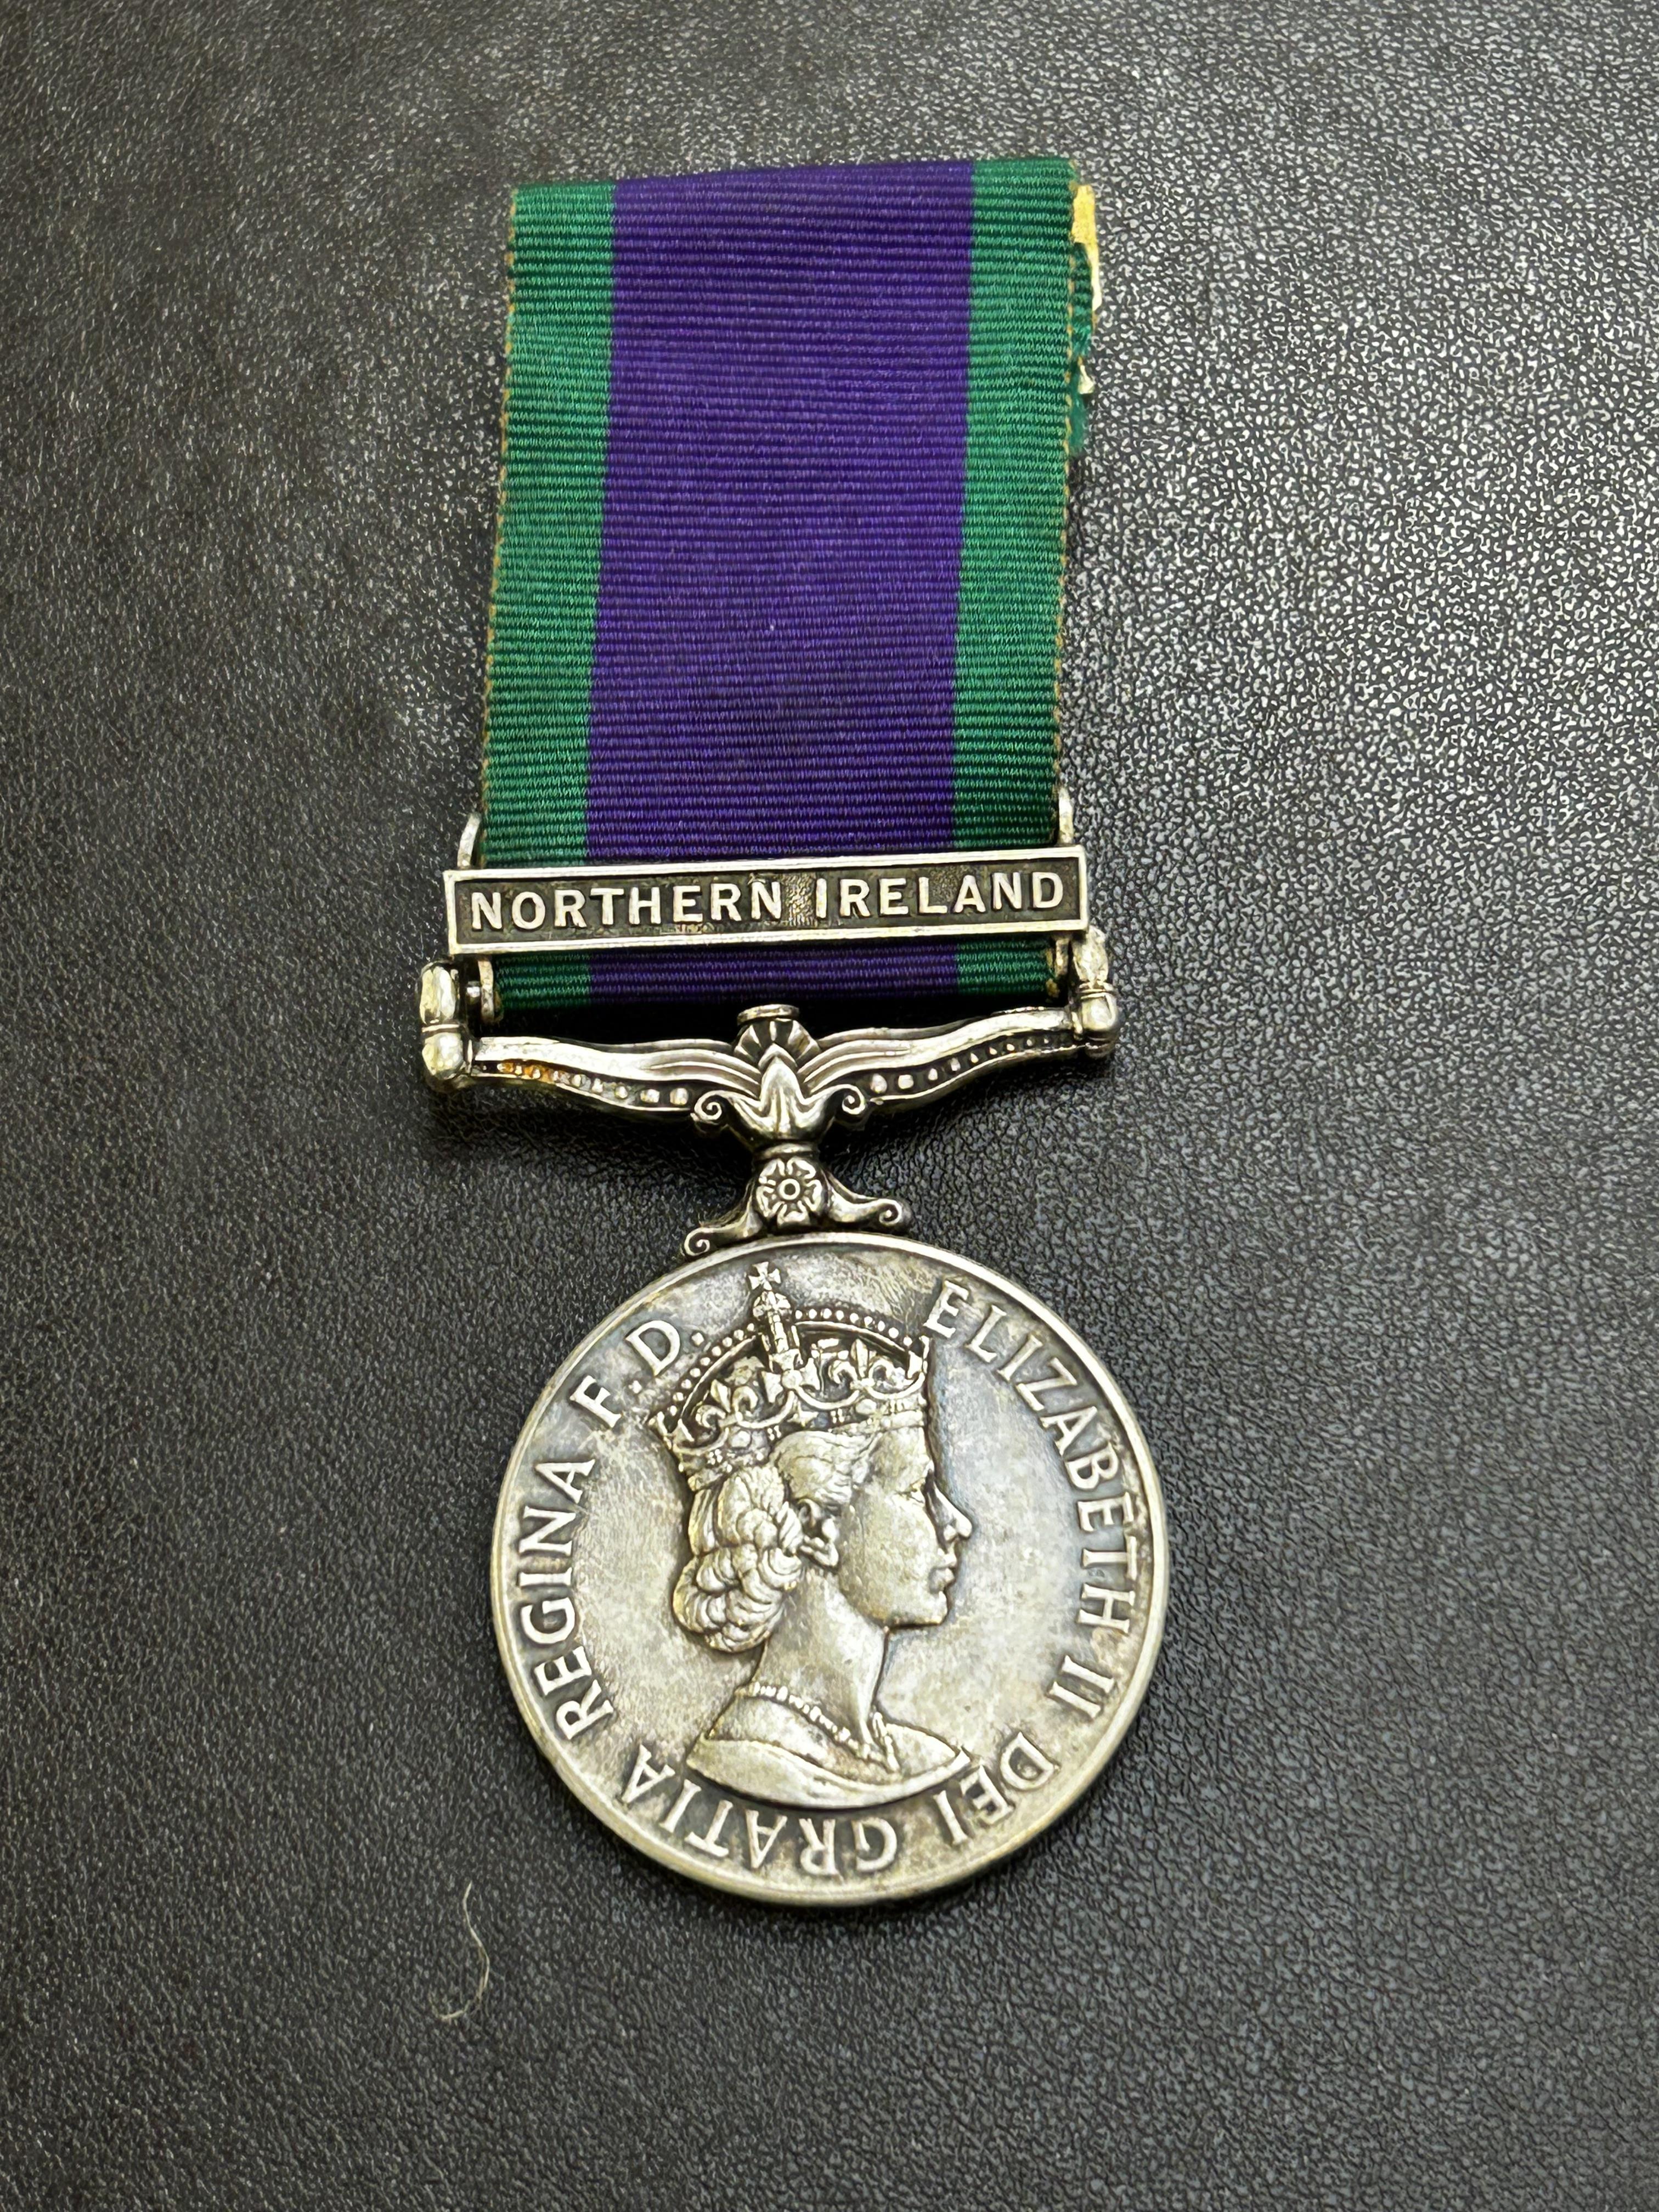 Northern Ireland for campaign service medal SAC B